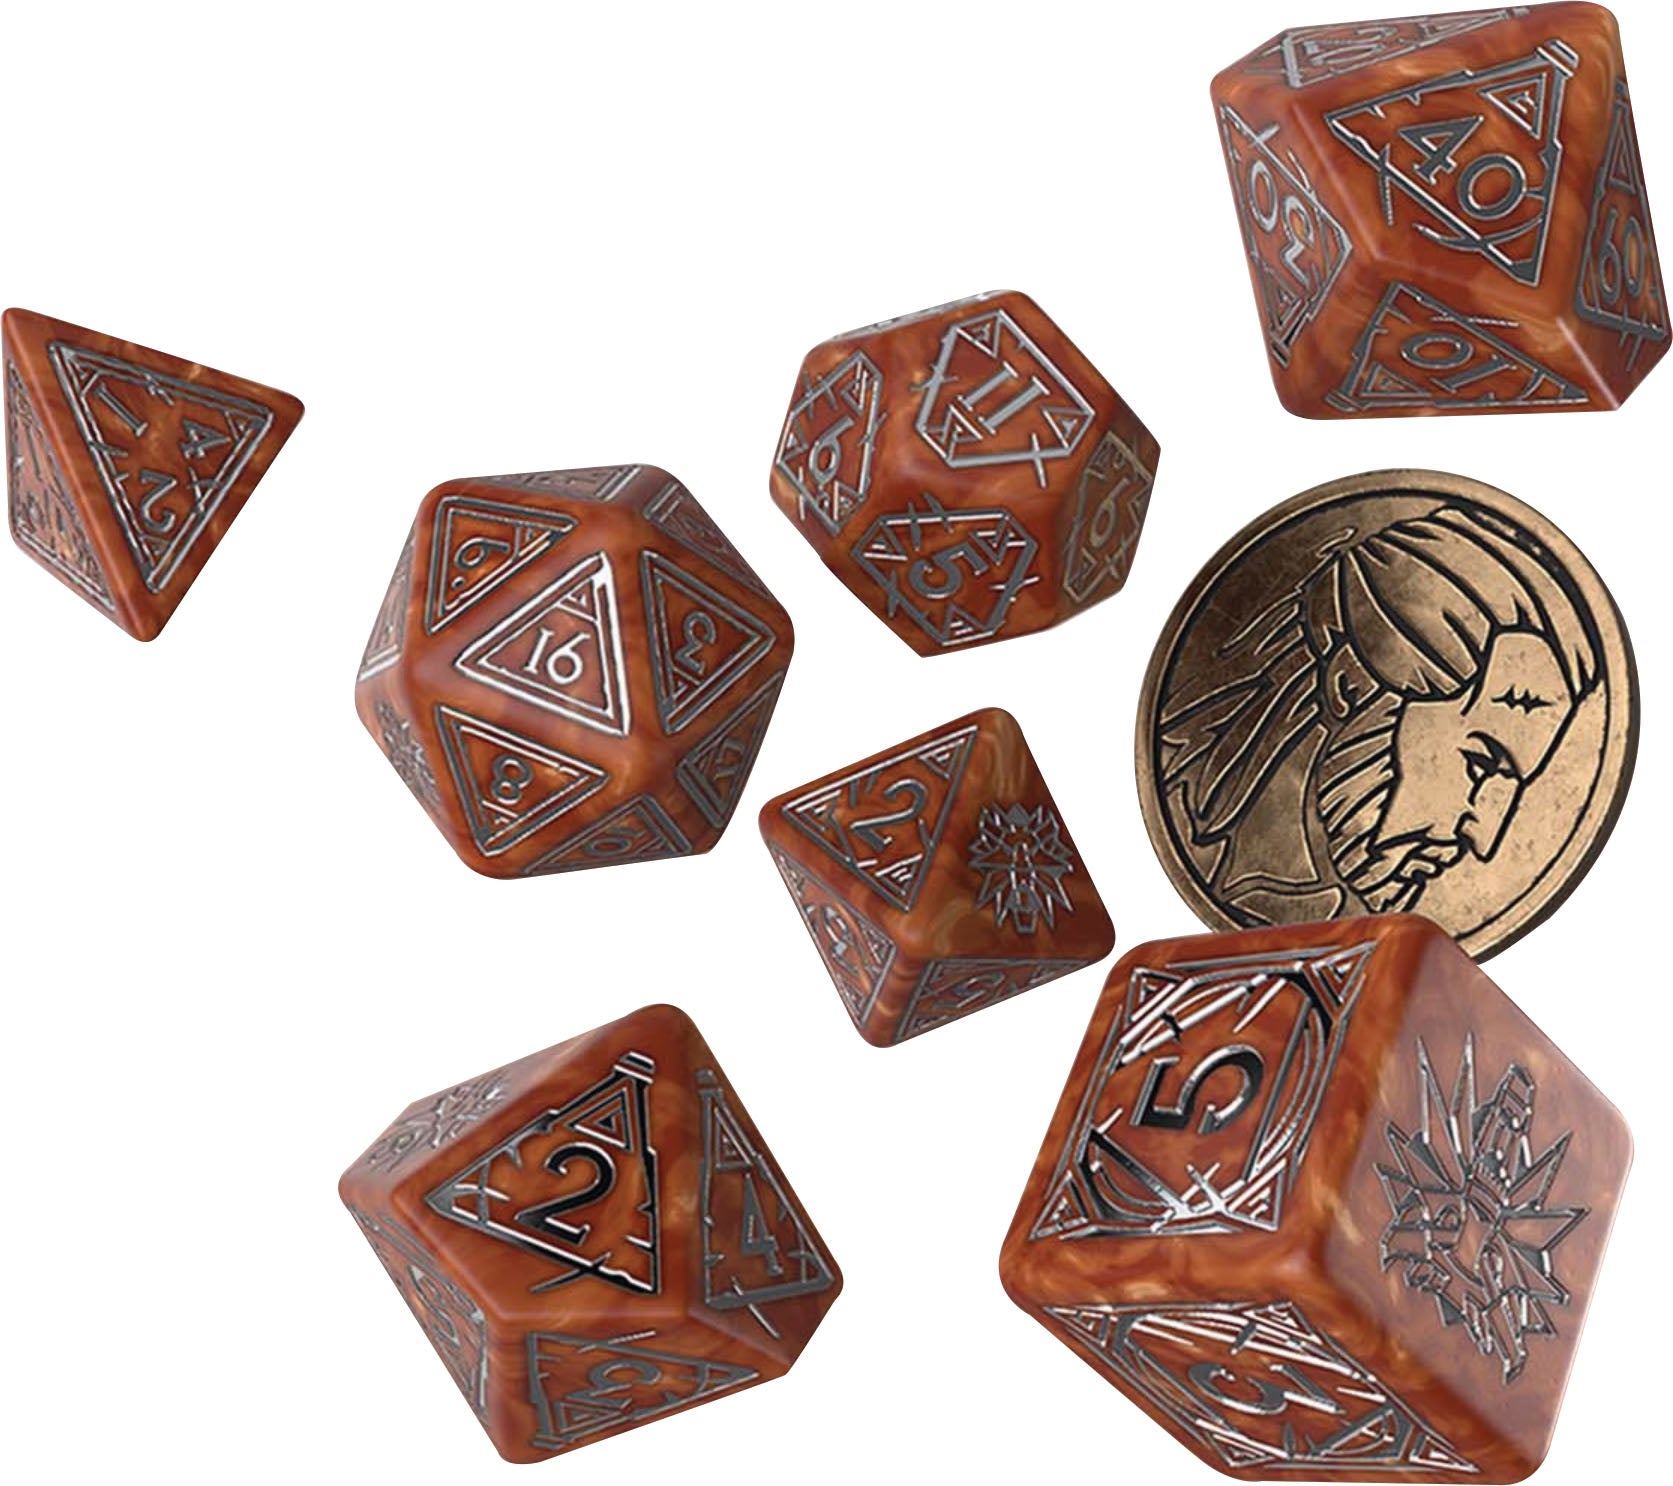 The Witcher Dice Set: Geralt - The Monster Slayer (7 + coin) - Bards & Cards